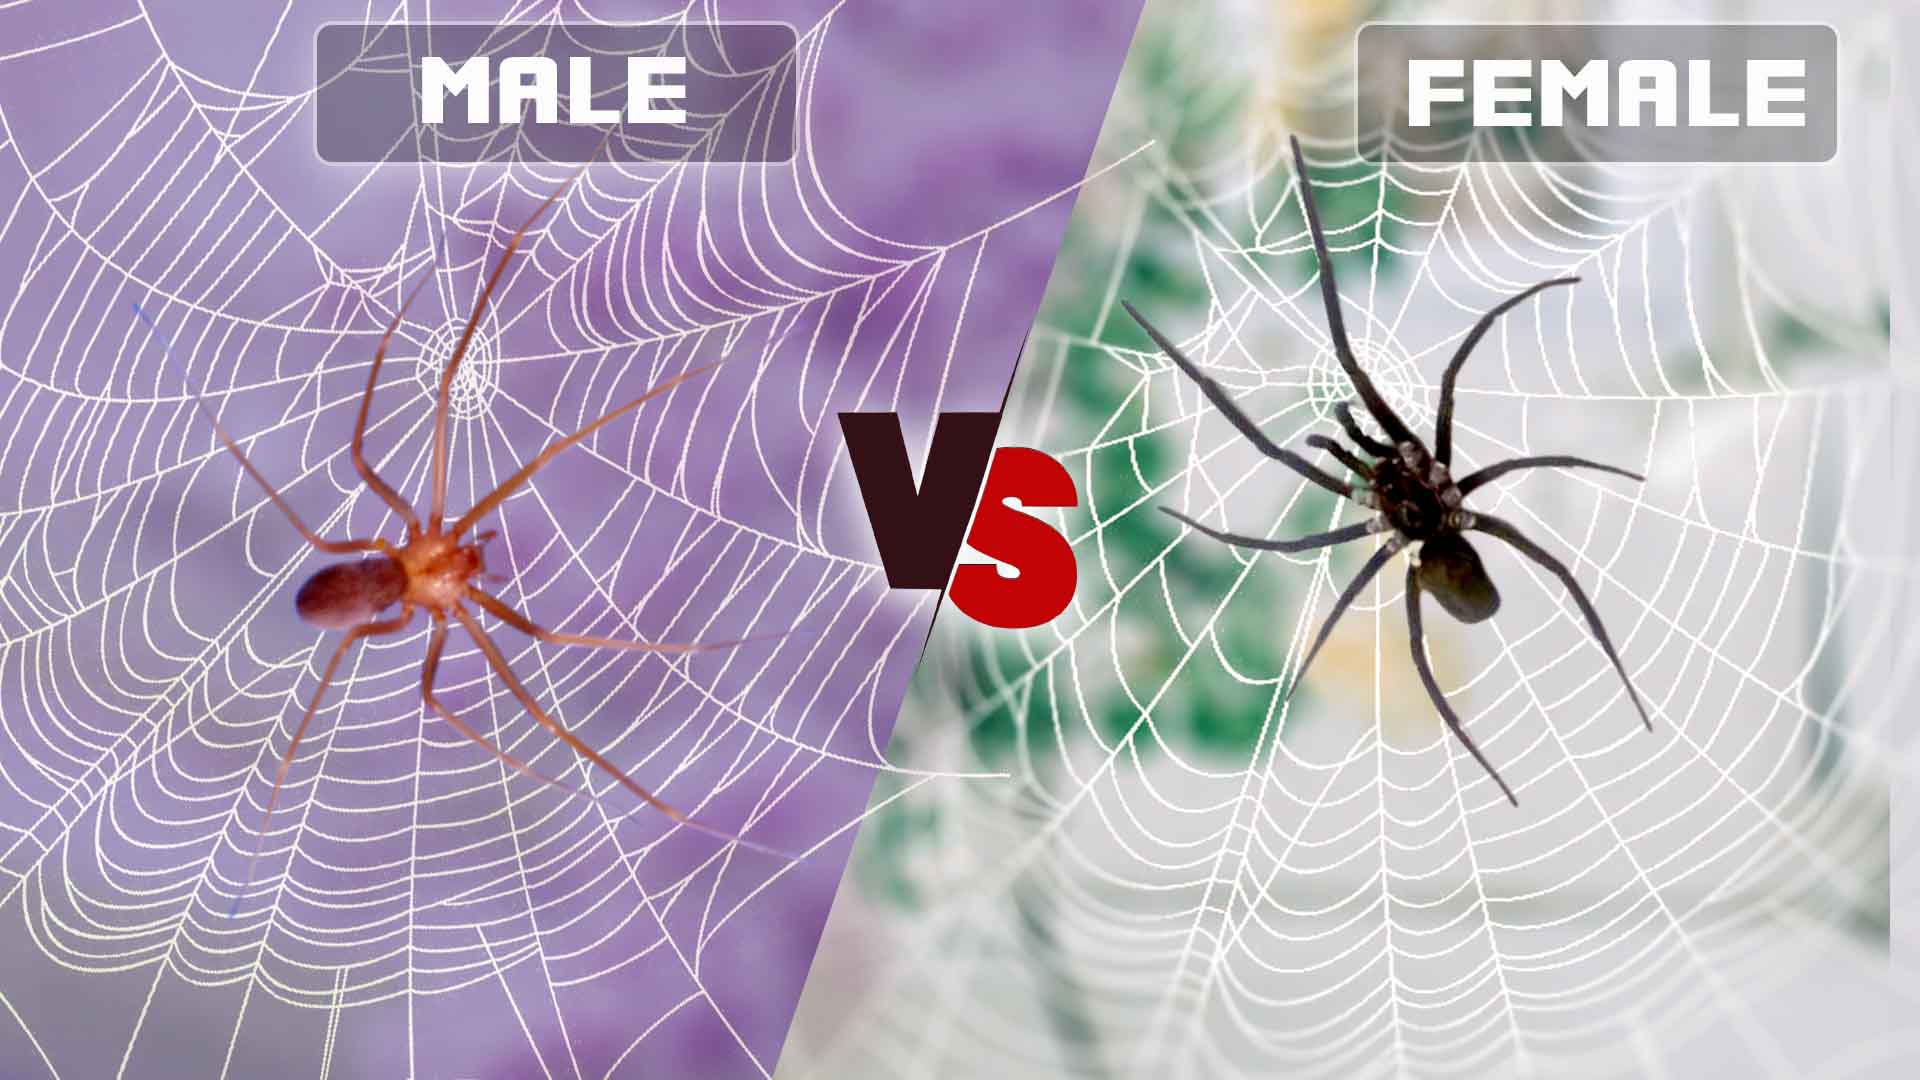 Southern House Spider Male vs Female